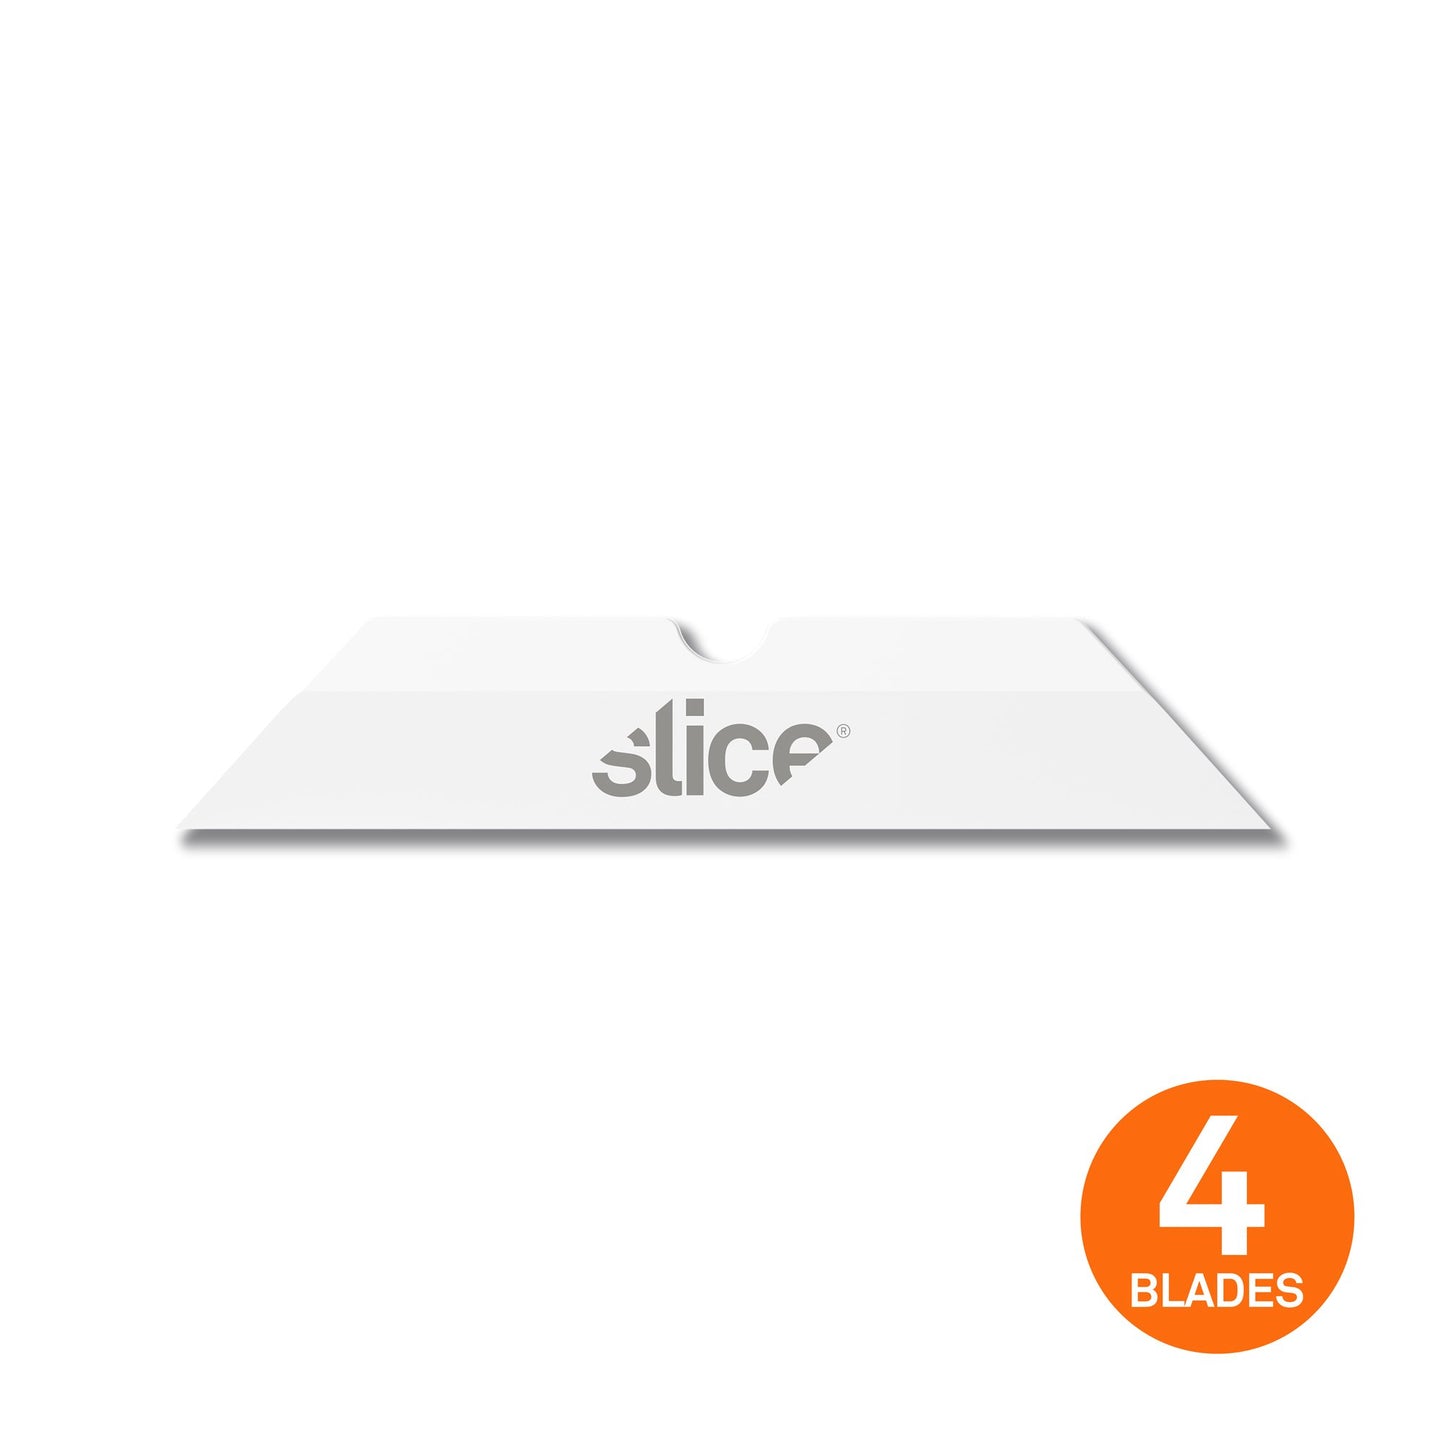 The Slice® 10408 Box Cutter Blades with pointed tips